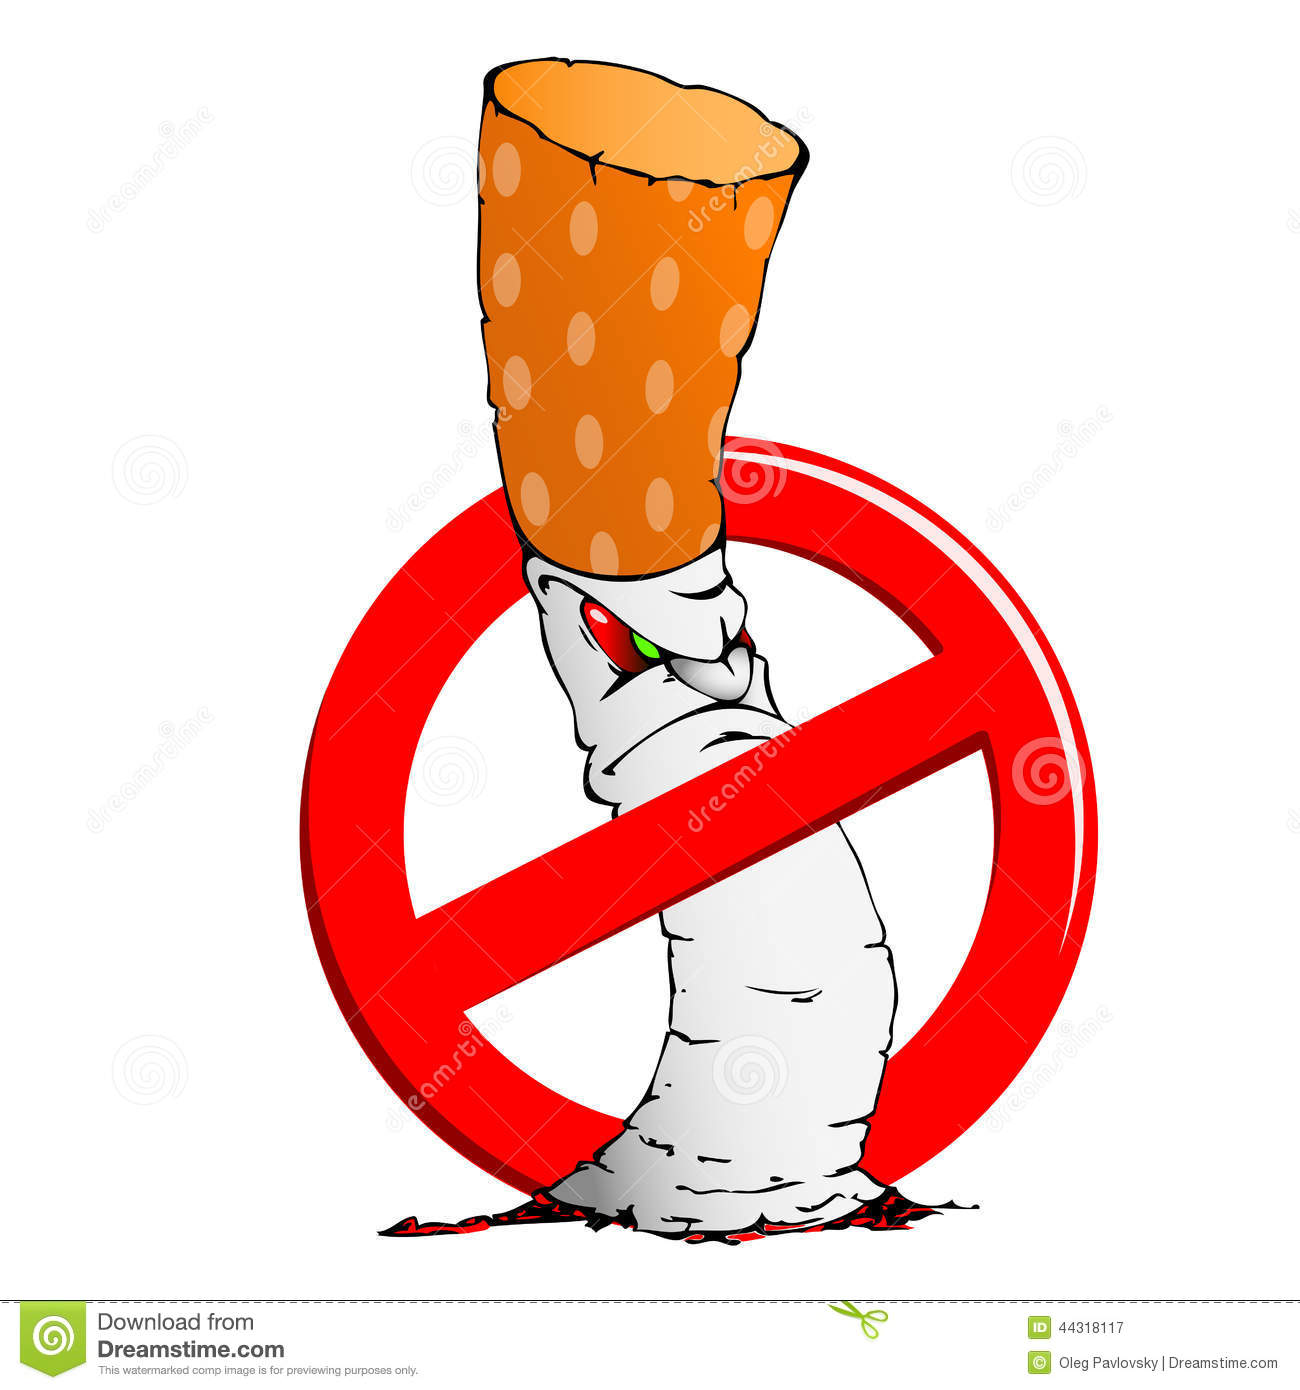 Showing post & media for Cartoon smoking signs.